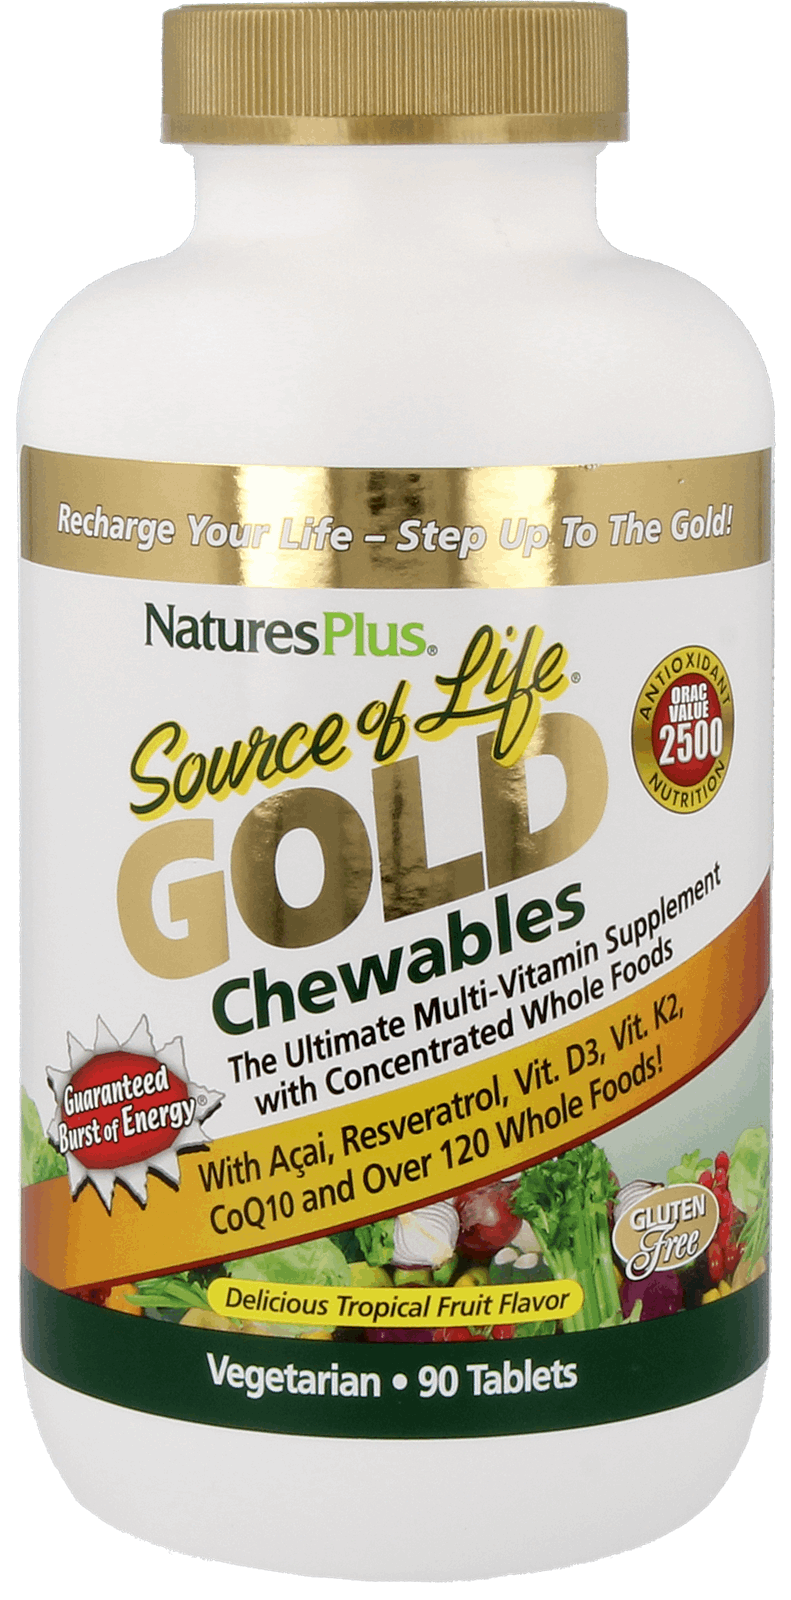 Source of Life® GOLD Chewables 